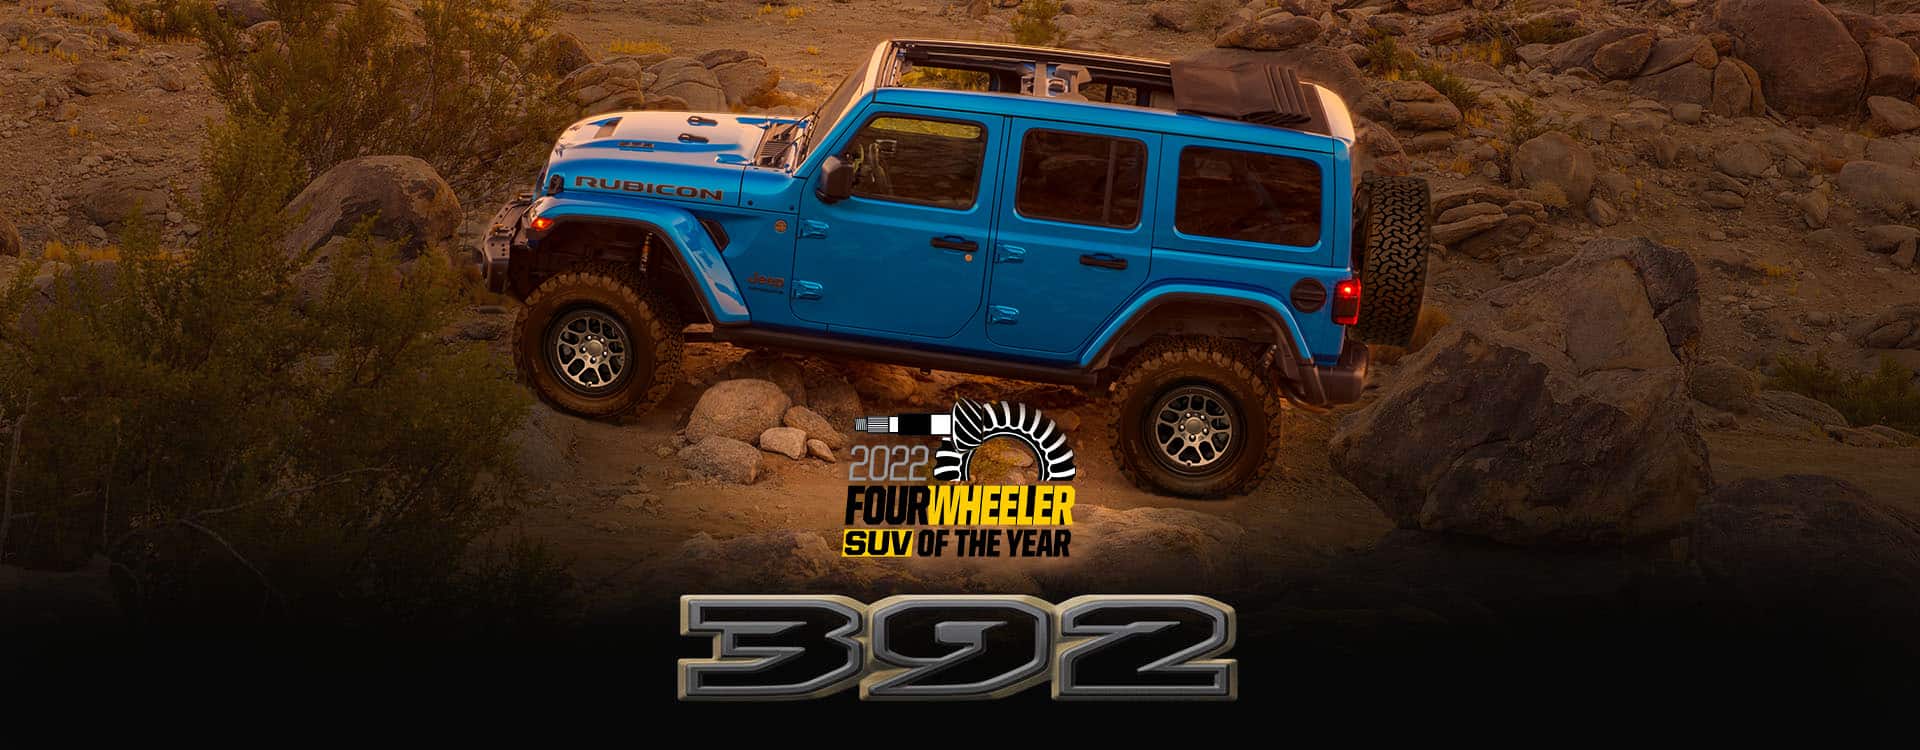 Images of the Jeep Wrangler 392